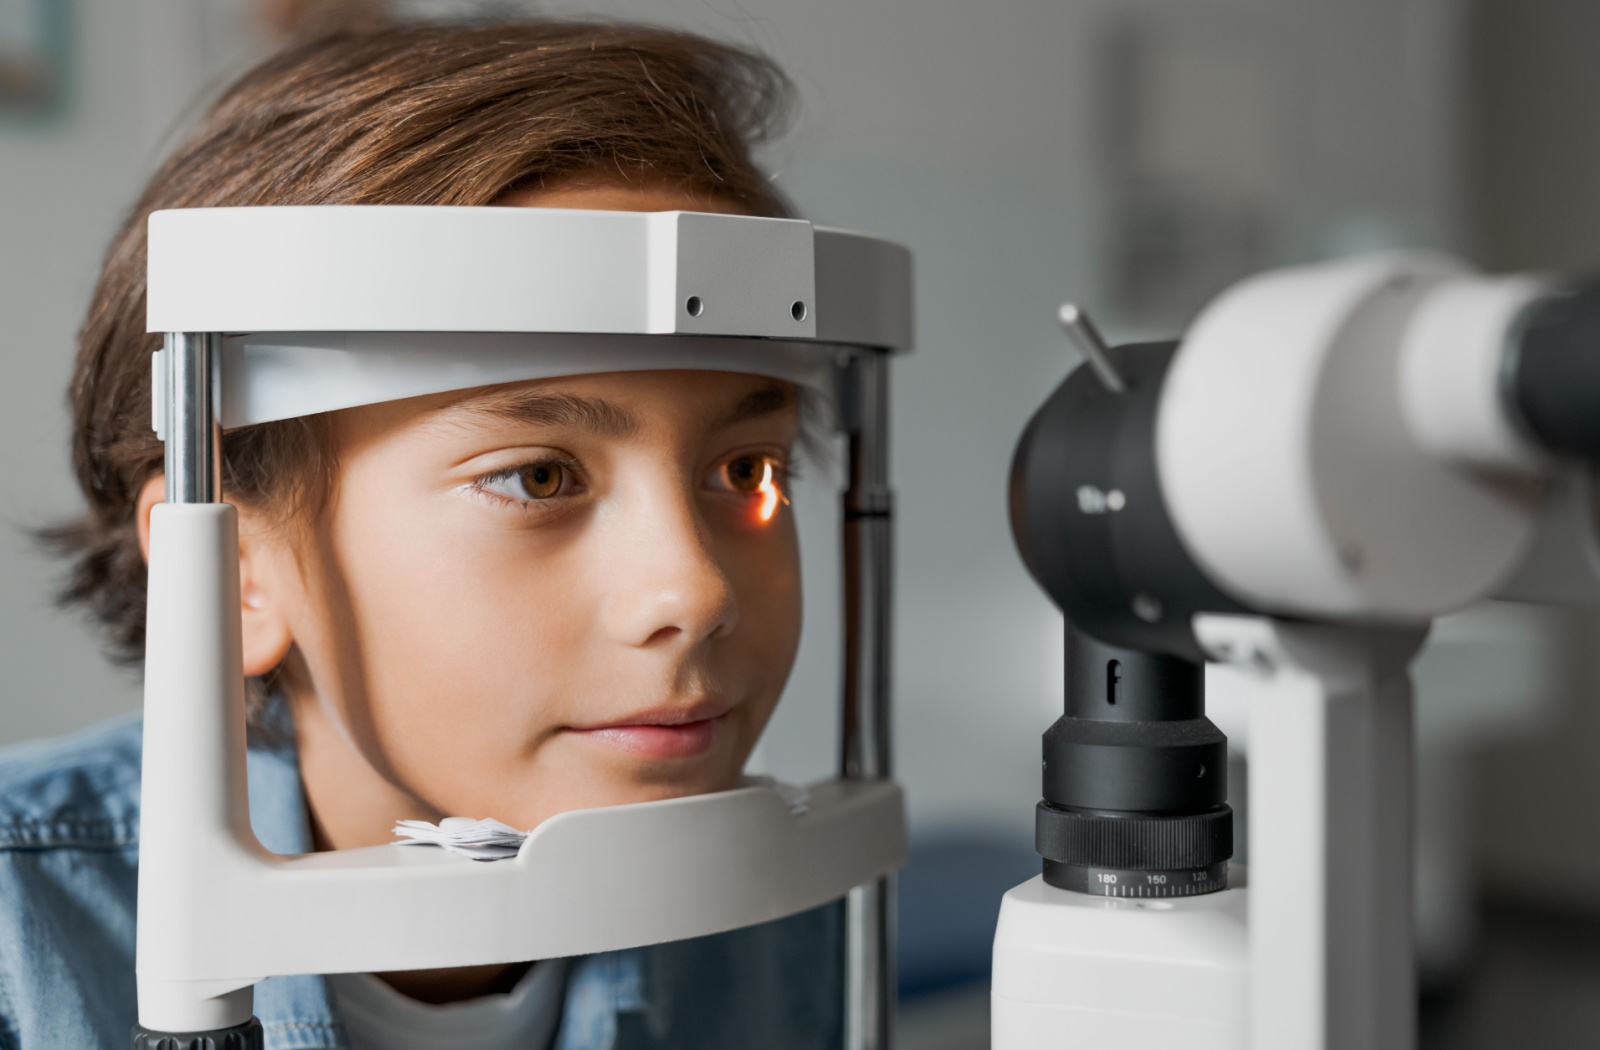 Close-up of a young boy looking into a machine that tests his vision